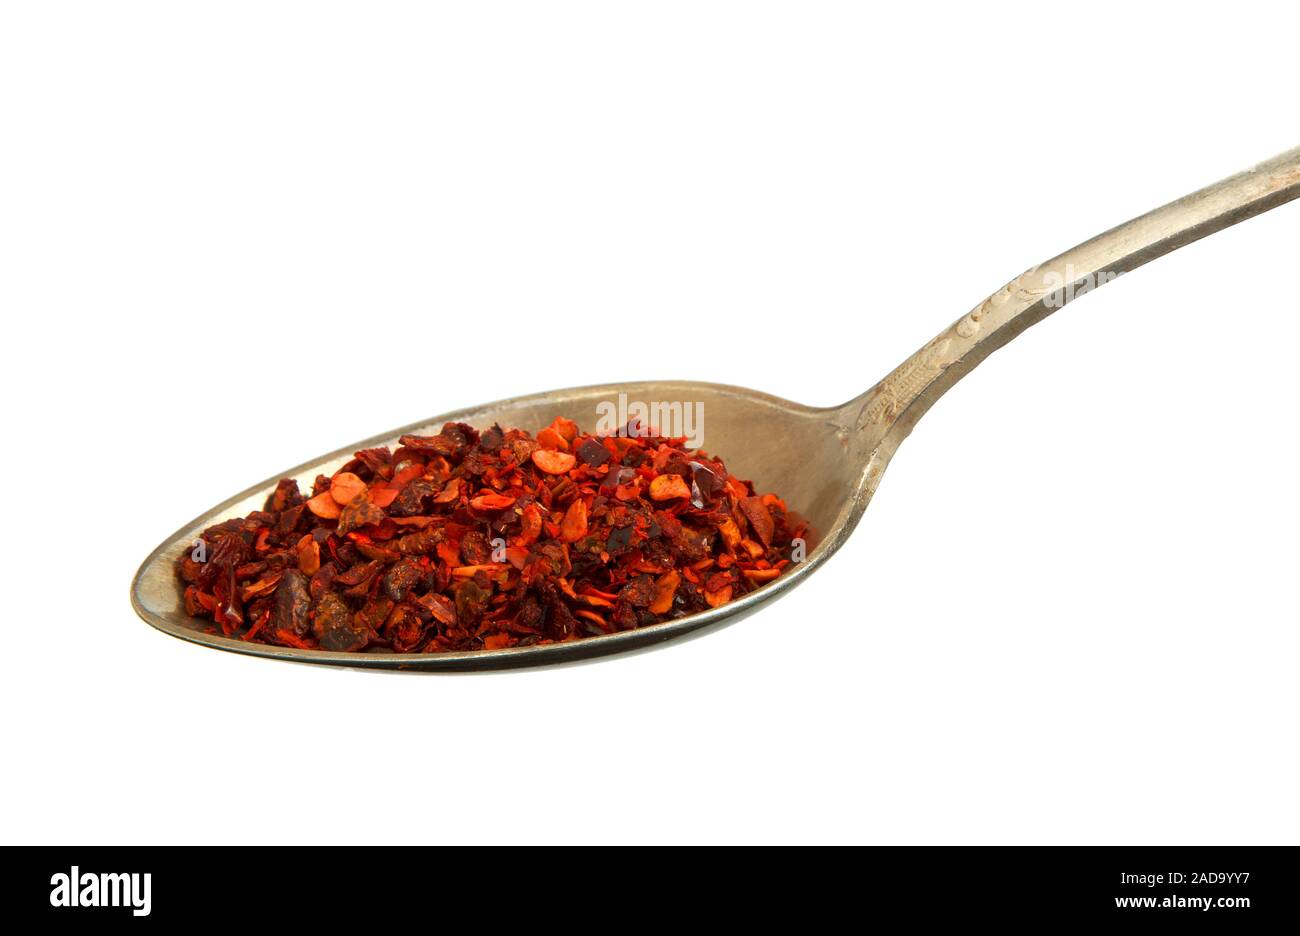 https://c8.alamy.com/comp/2AD9YY7/mixing-slices-of-pepper-in-an-old-spoon-isolated-on-a-white-background-view-from-above-spices-in-a-spoon-on-isolate-2AD9YY7.jpg